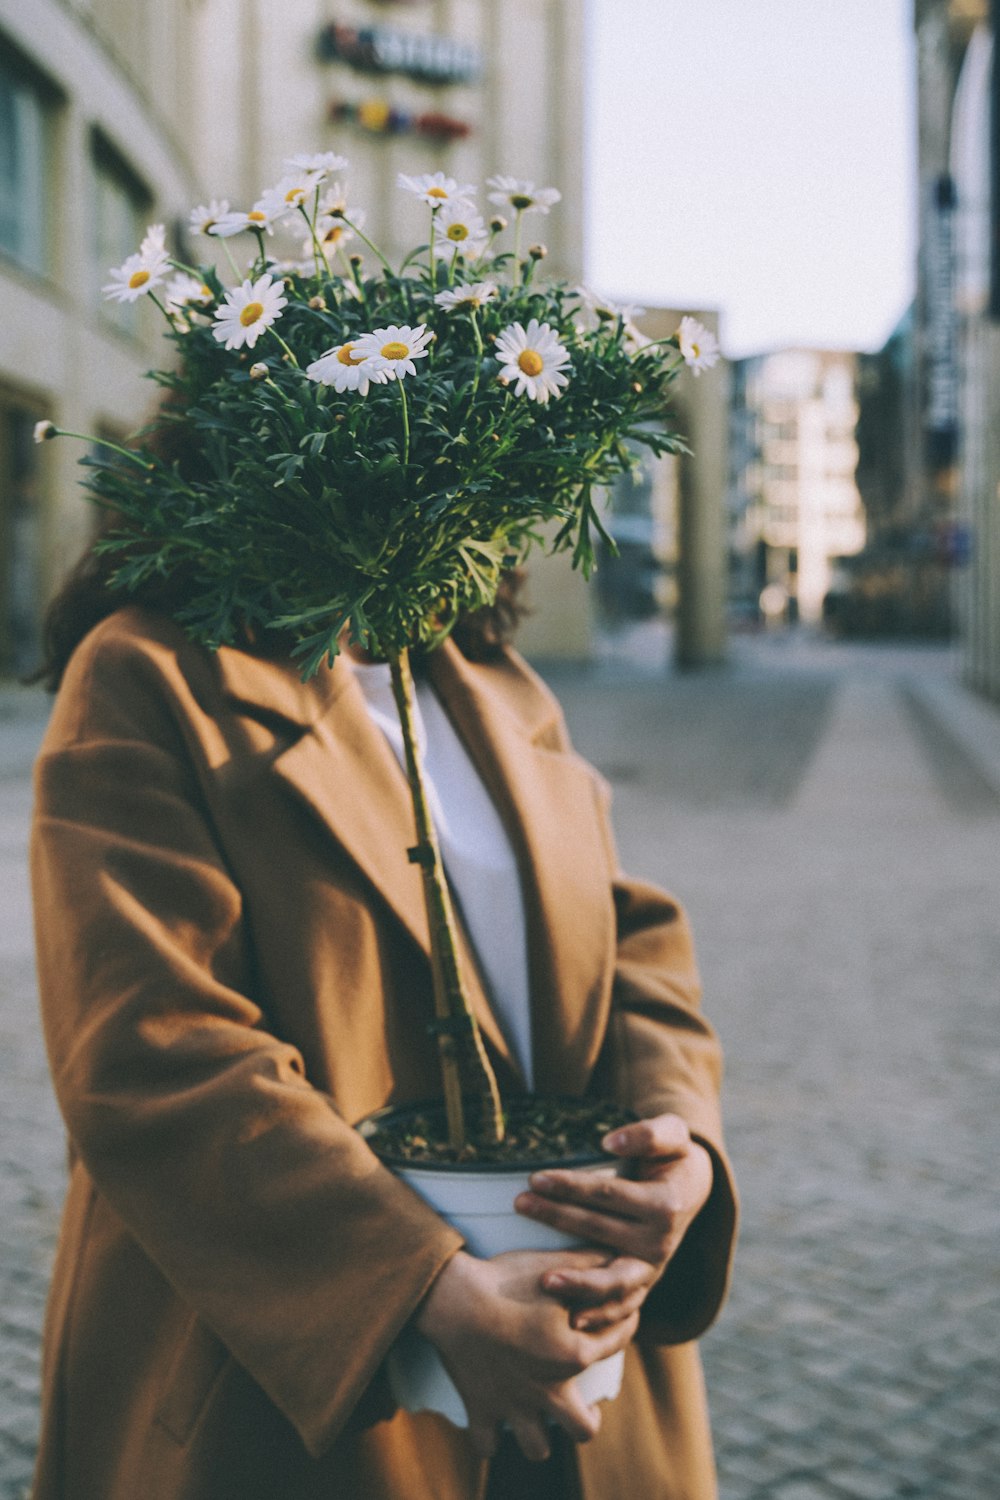 person in brown coat holding white flowers